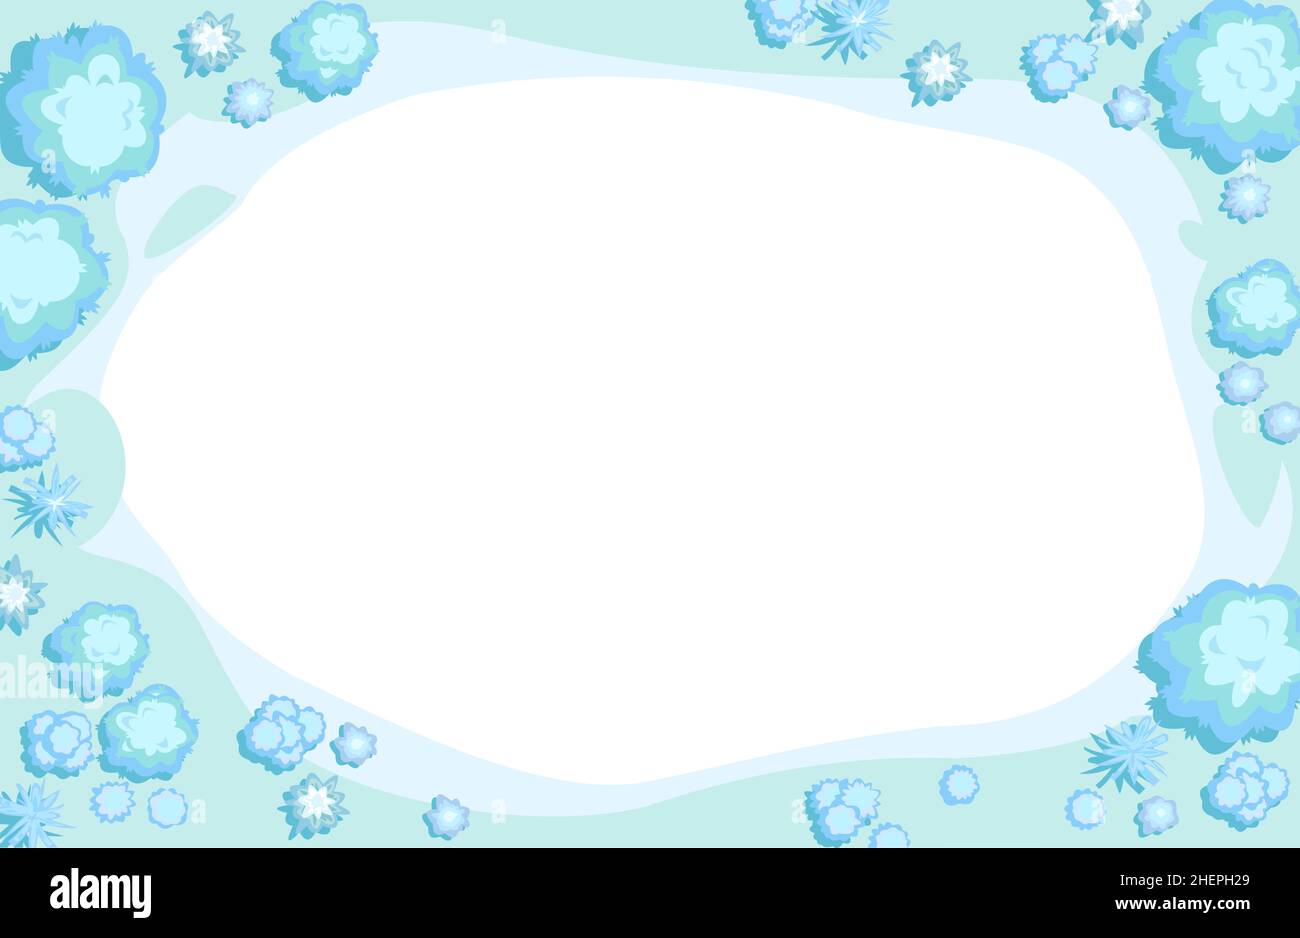 Winter landscape top view. Frame around edge of Oval image. Snowy frosty nature in cold season. From high. Drifts of snow. Illustration in cartoon sty Stock Vector